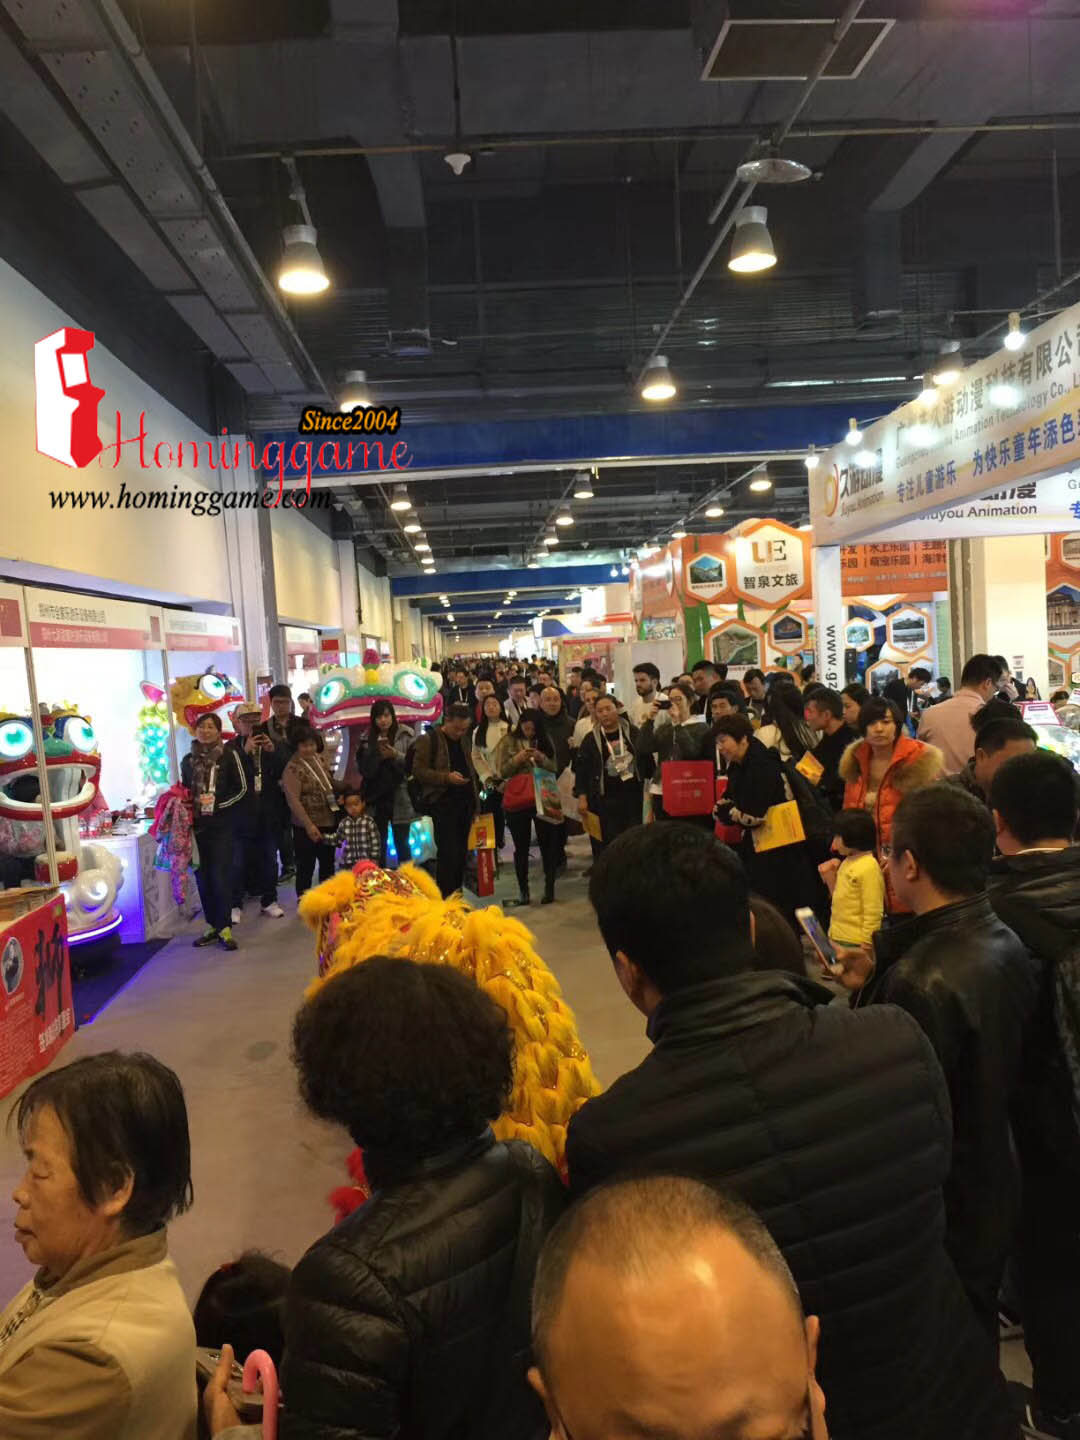 We Are in 2018 CAAPA BeiJing Game Exhibition Show,CAAPA,game show,game exhibition show,game machine,arcade game machine,coin operated game machine,prize game machine,coin pusher,simulator game machine,amusement park game equipment,family entertainment,entertainment game machine,hominggame,homing game